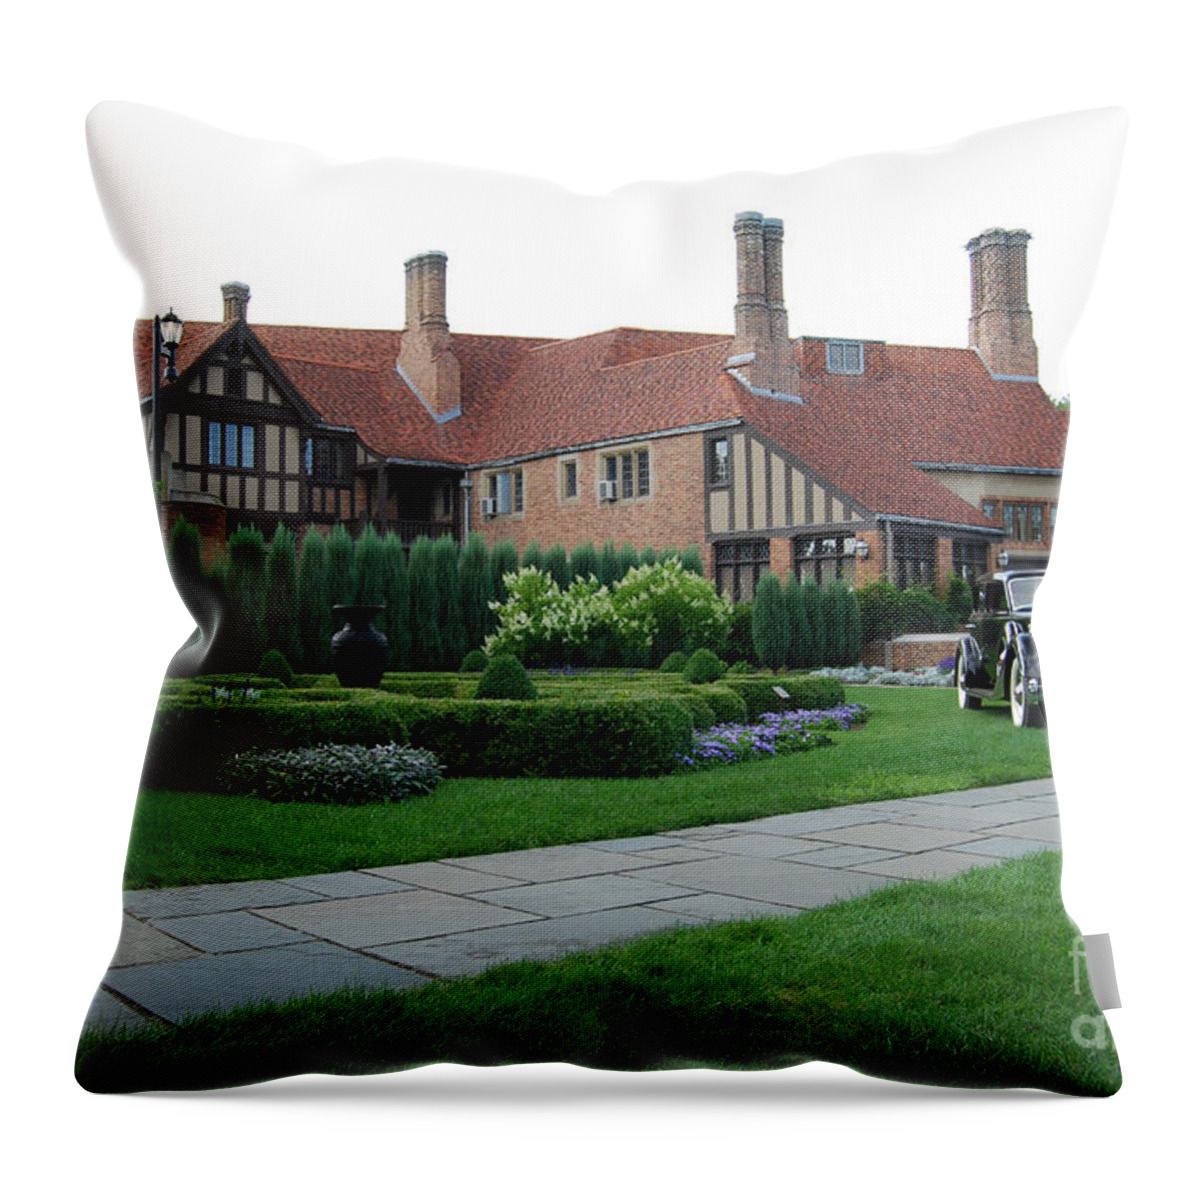 Concours D'elegance Throw Pillow featuring the photograph Meadowbrook Hall by Grace Grogan